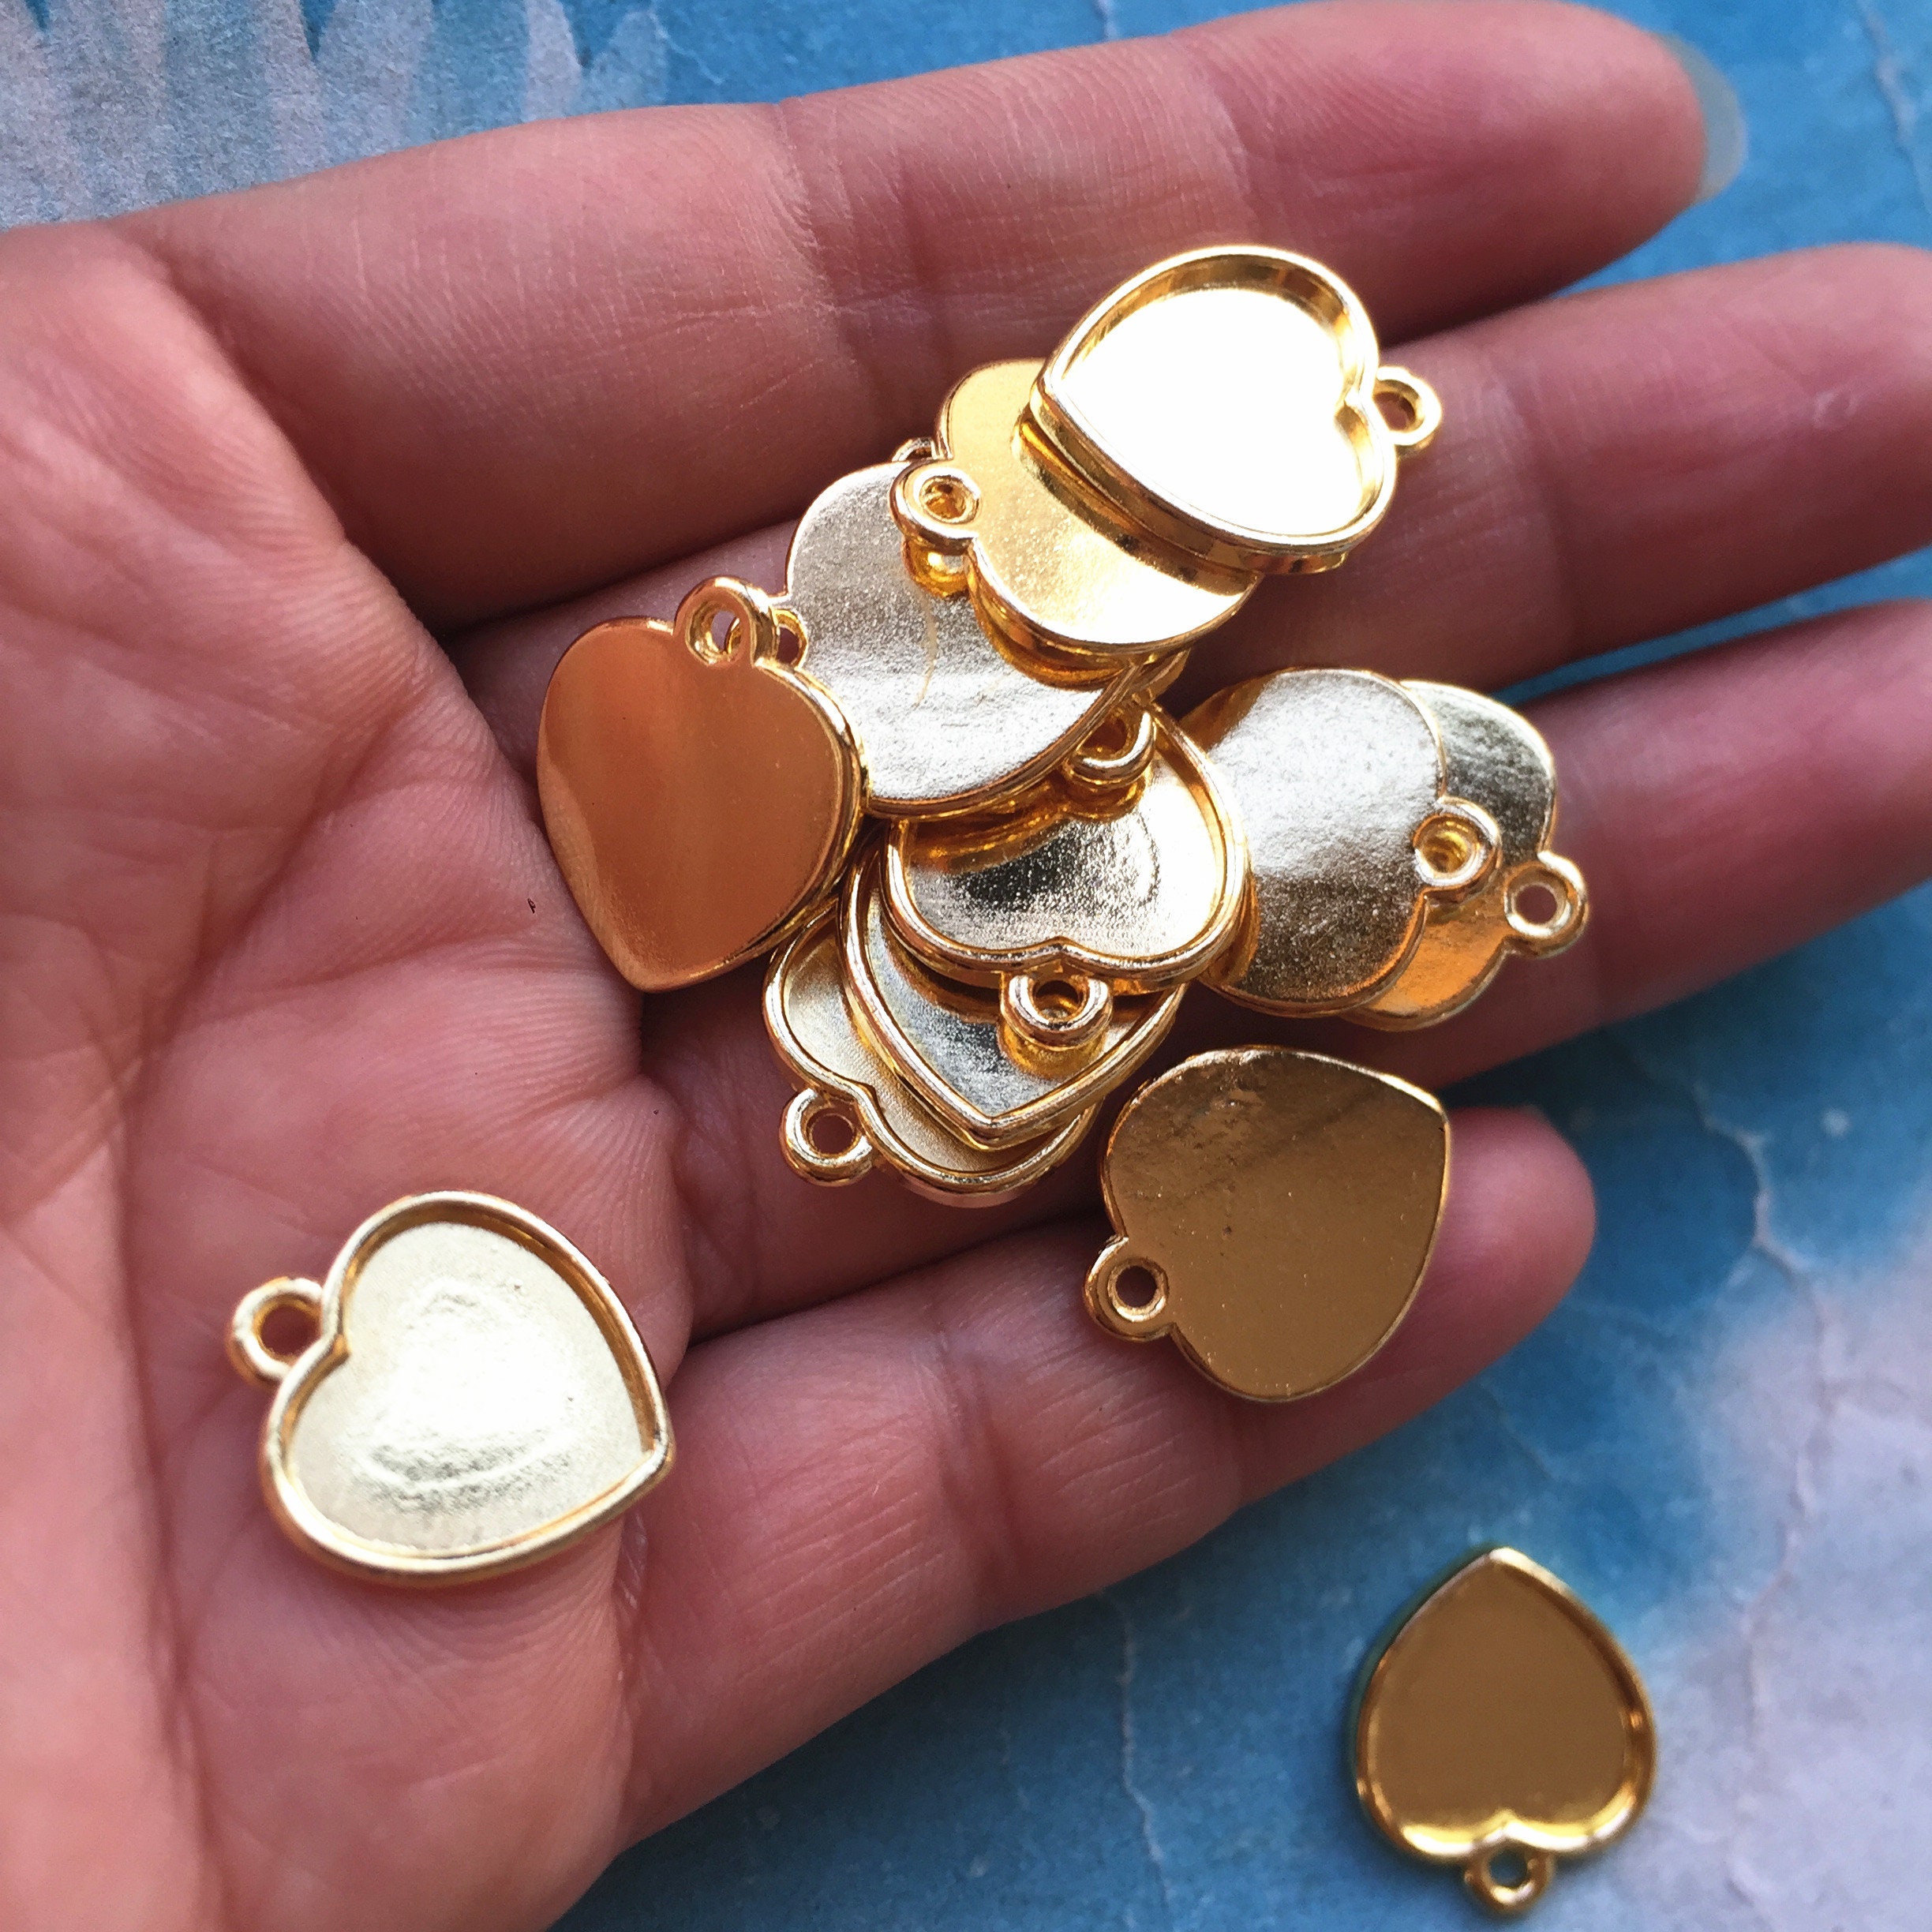 50 Sets Heart Pendant Bezels with Glass Cabochons 12x12mm Heart Blanks Stainless Steel Charms Pendant Cabochon Settings for DIY Jewelry Making